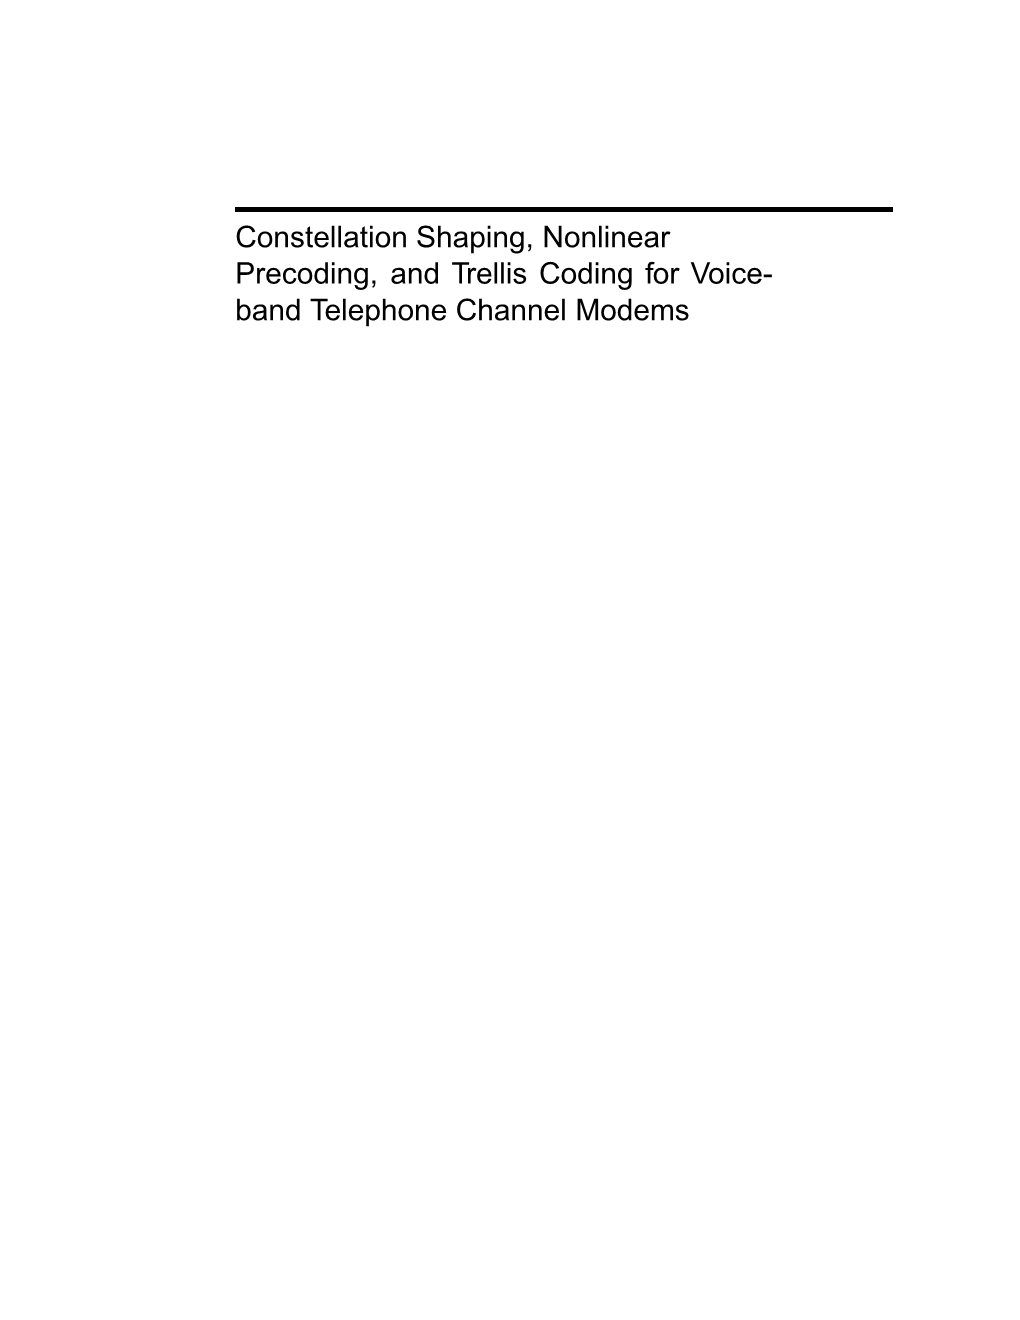 Constellation Shaping, Nonlinear Precoding, and Trellis Coding for Voice- Band Telephone Channel Modems